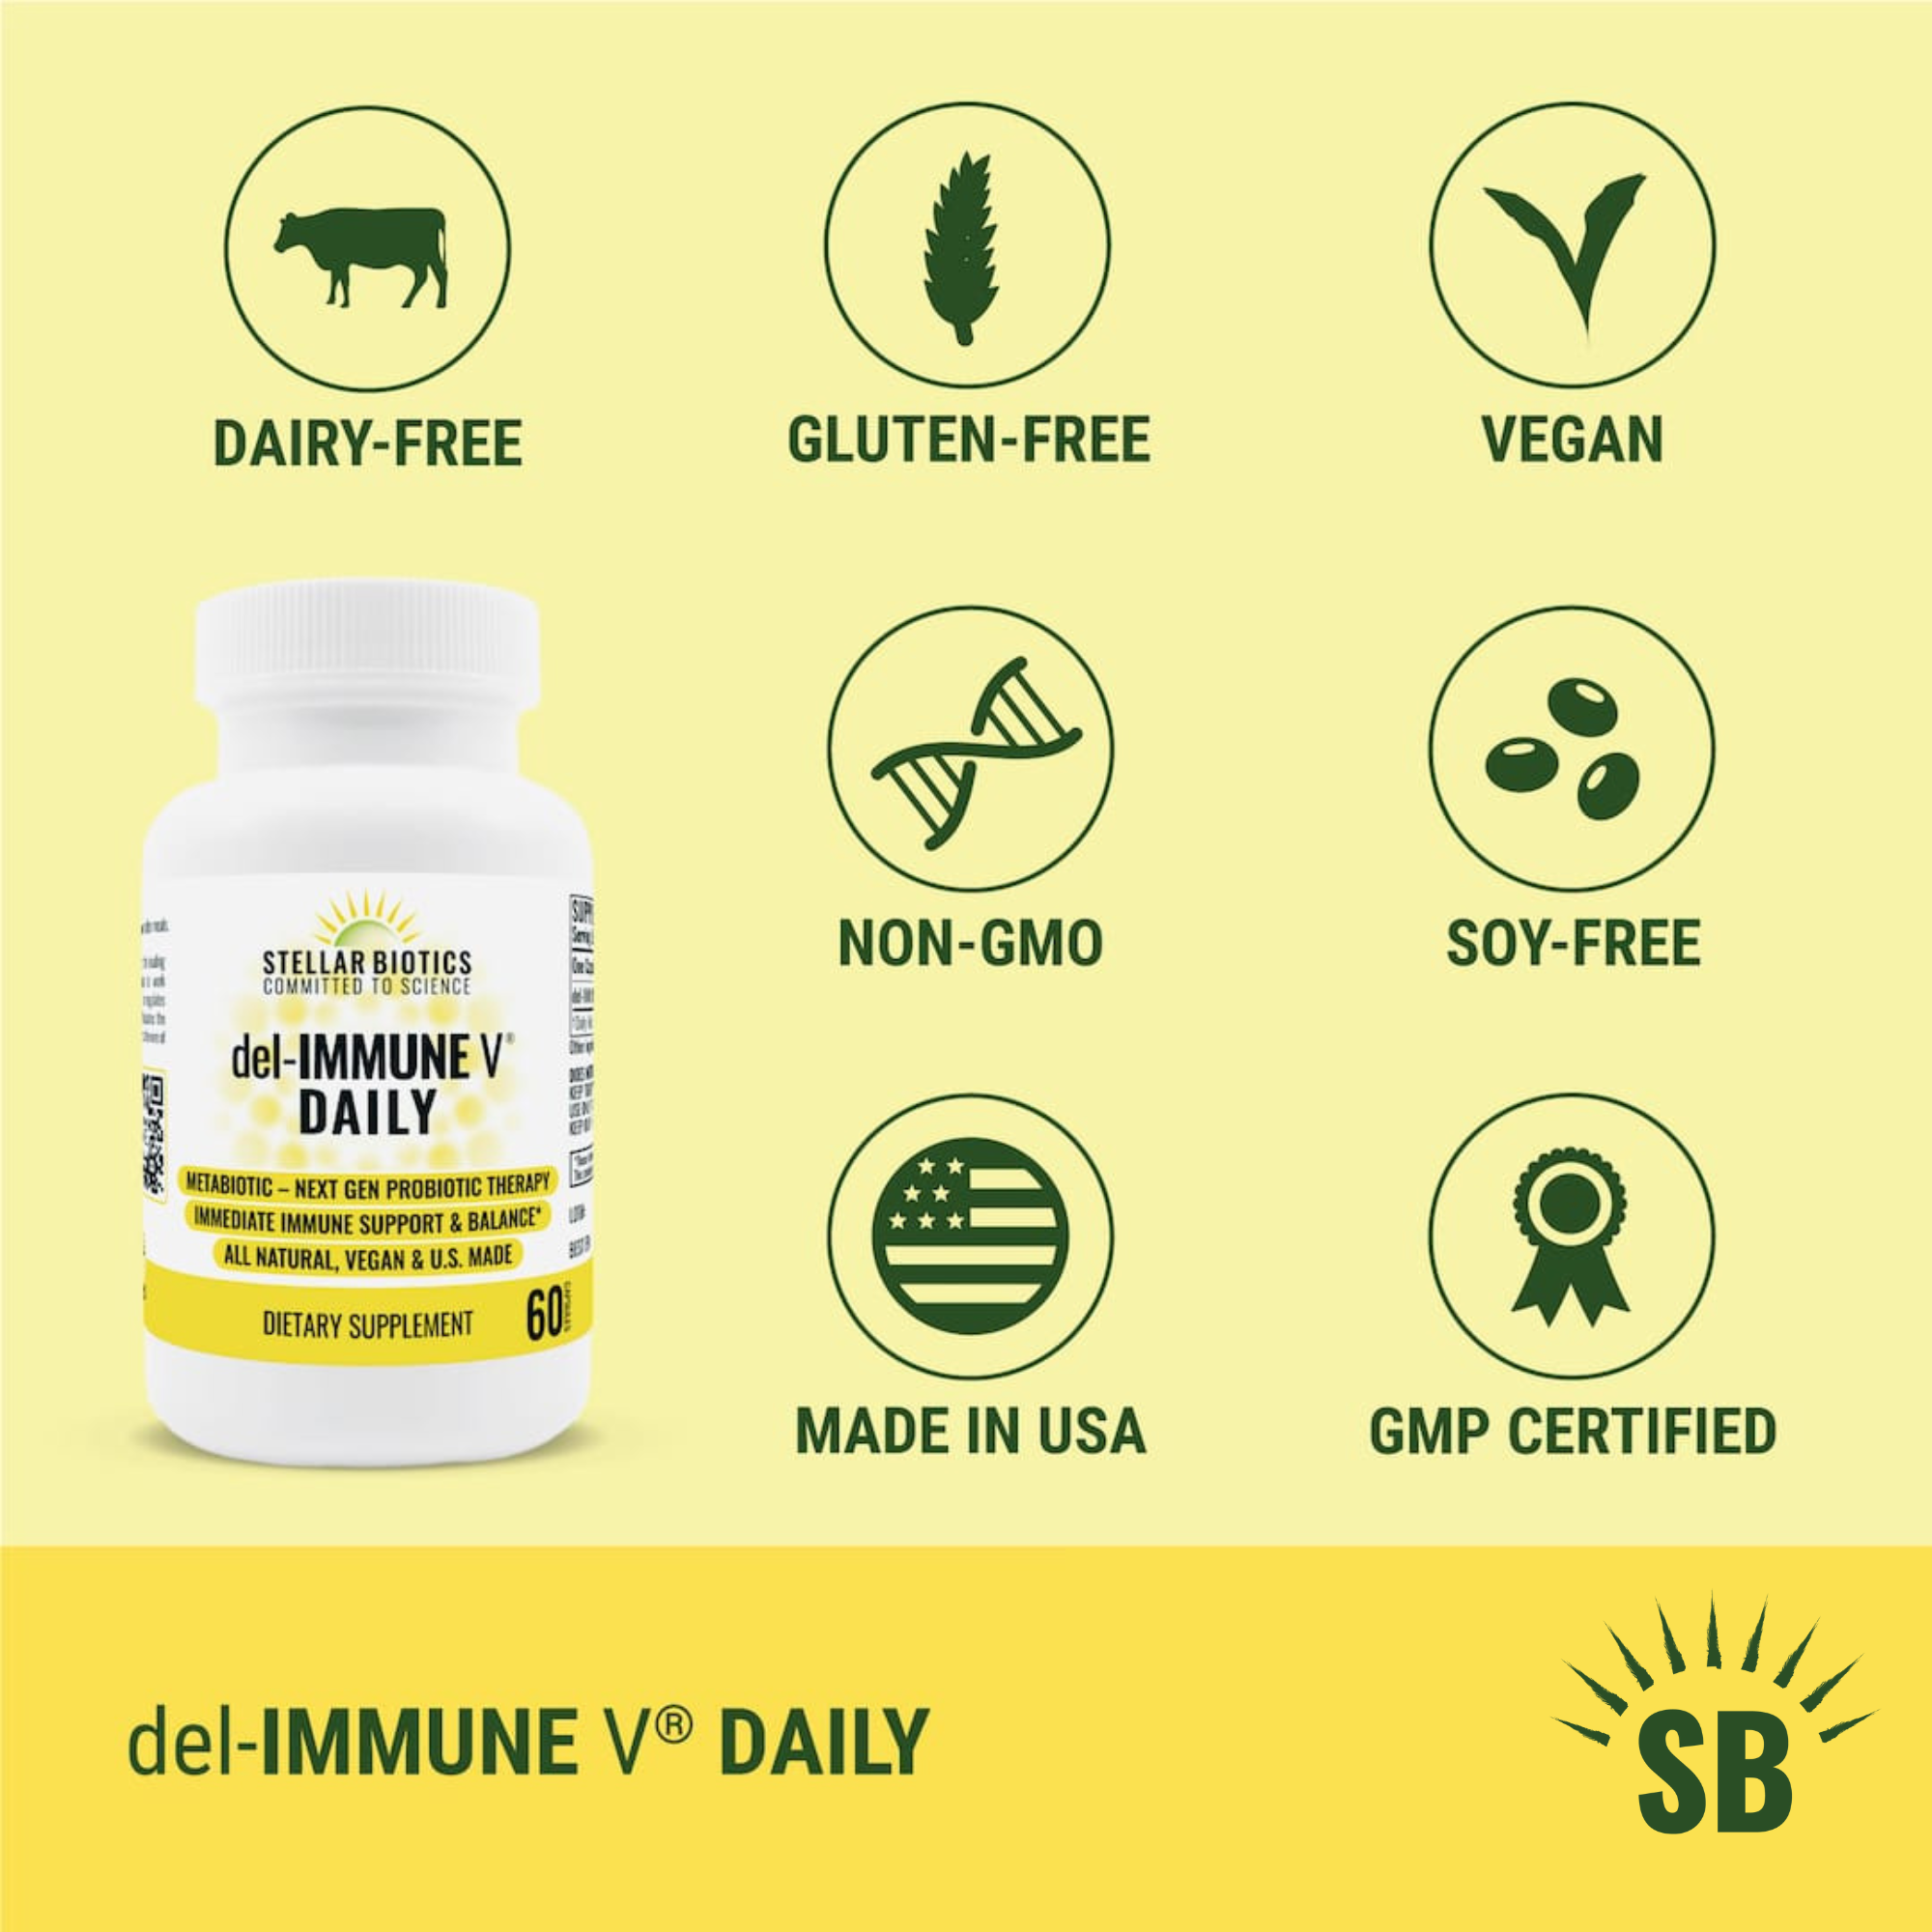 del immune v daily is vegan, Non-GMO, Dairy-Free, Gluten-Free, Soy-Free, GMP Certified, Made in USA